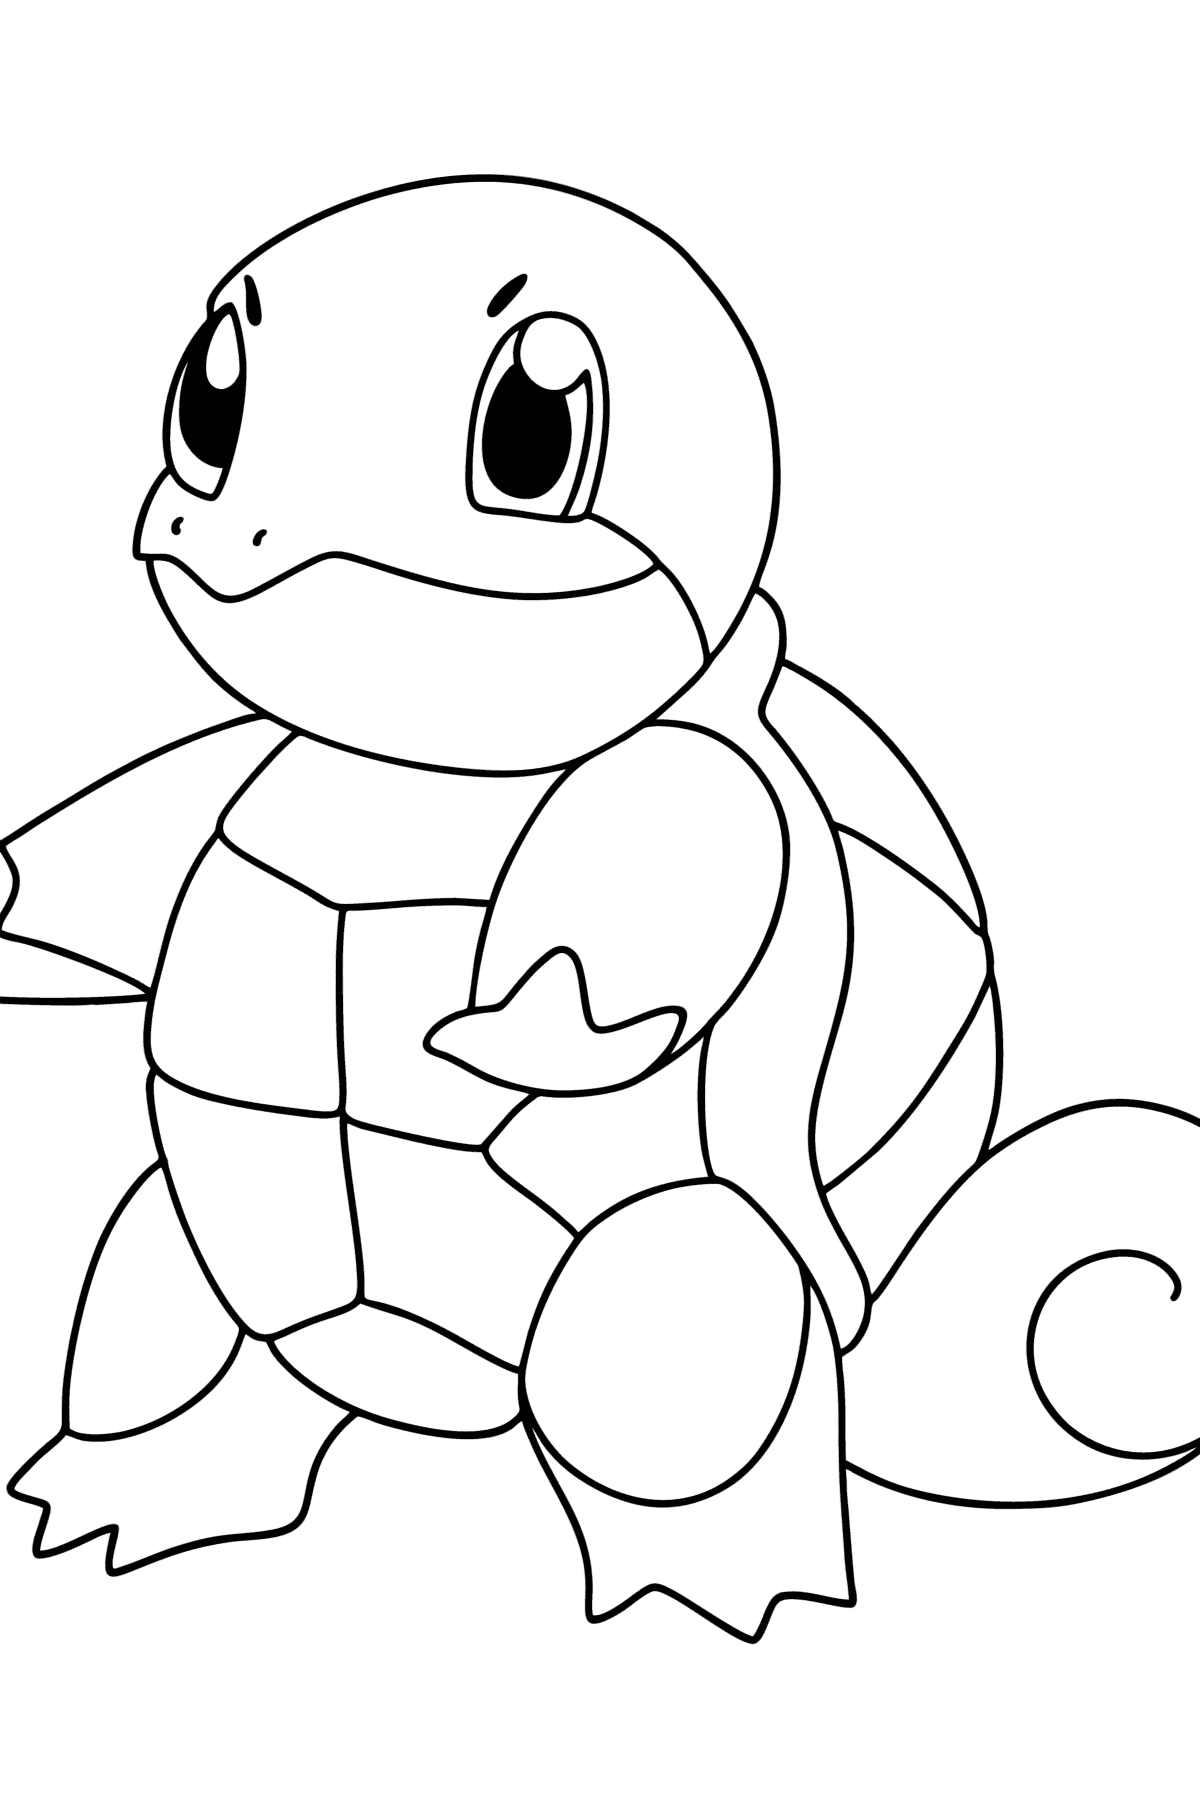 Coloring page Pokémon Go Squirtle - Coloring Pages for Kids